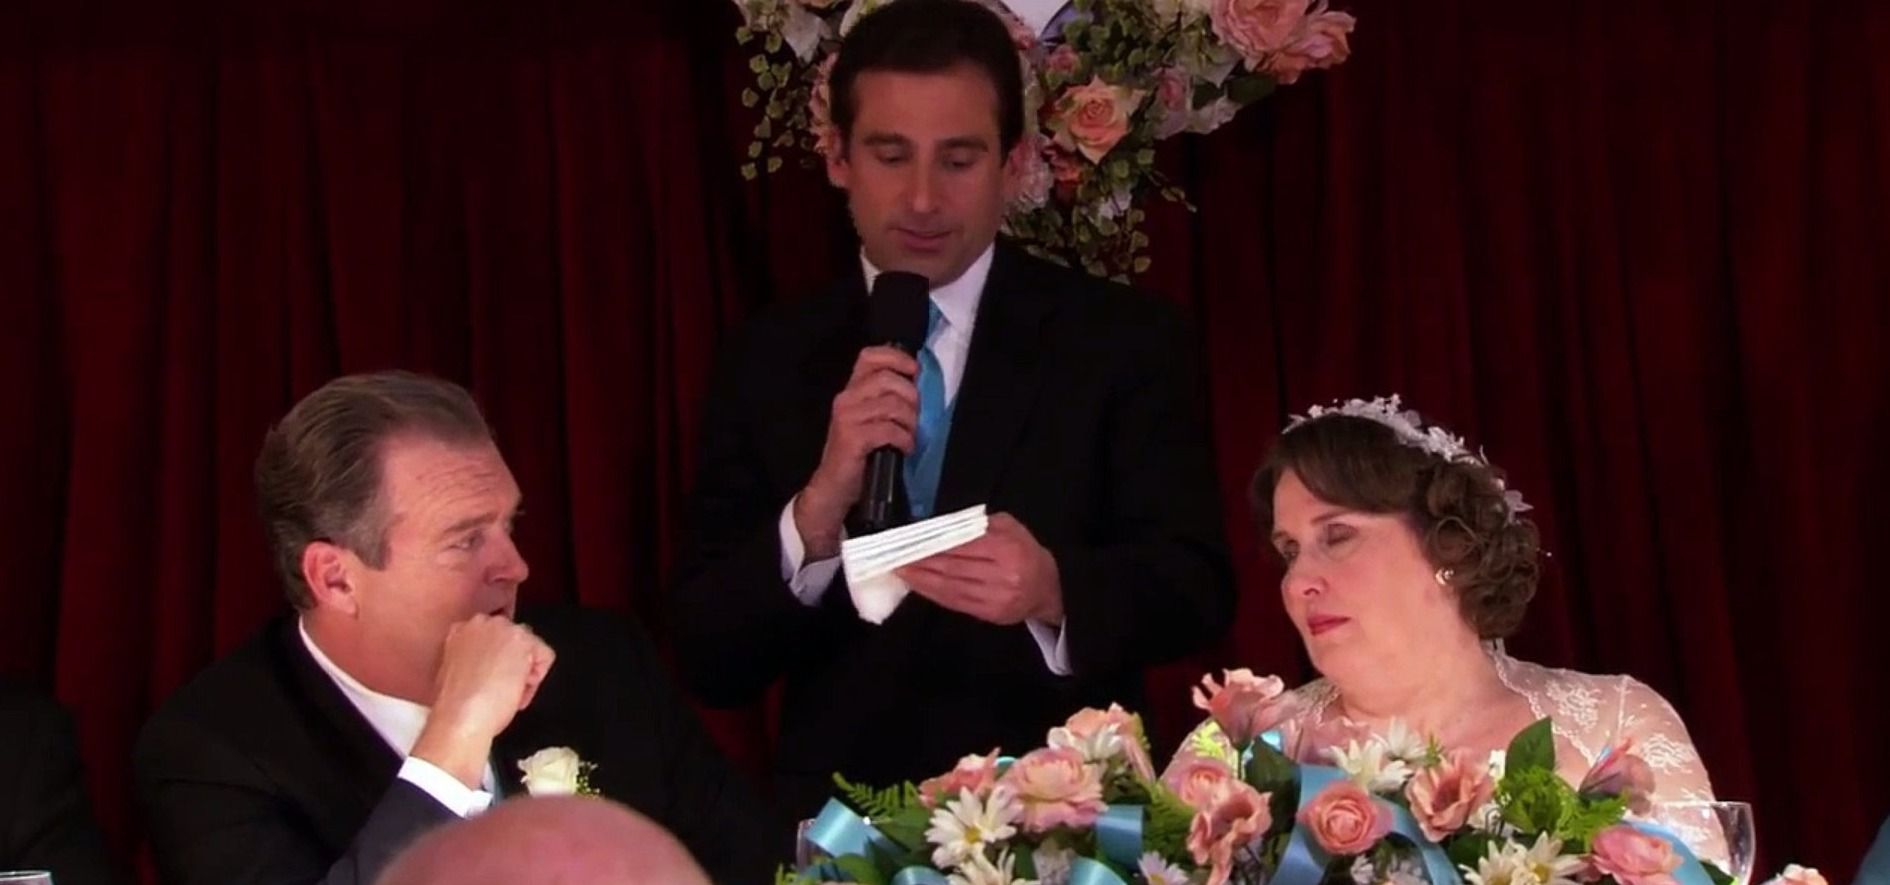 Michael (Steve Carell) giving a speech as Phyllis' wedding in The office